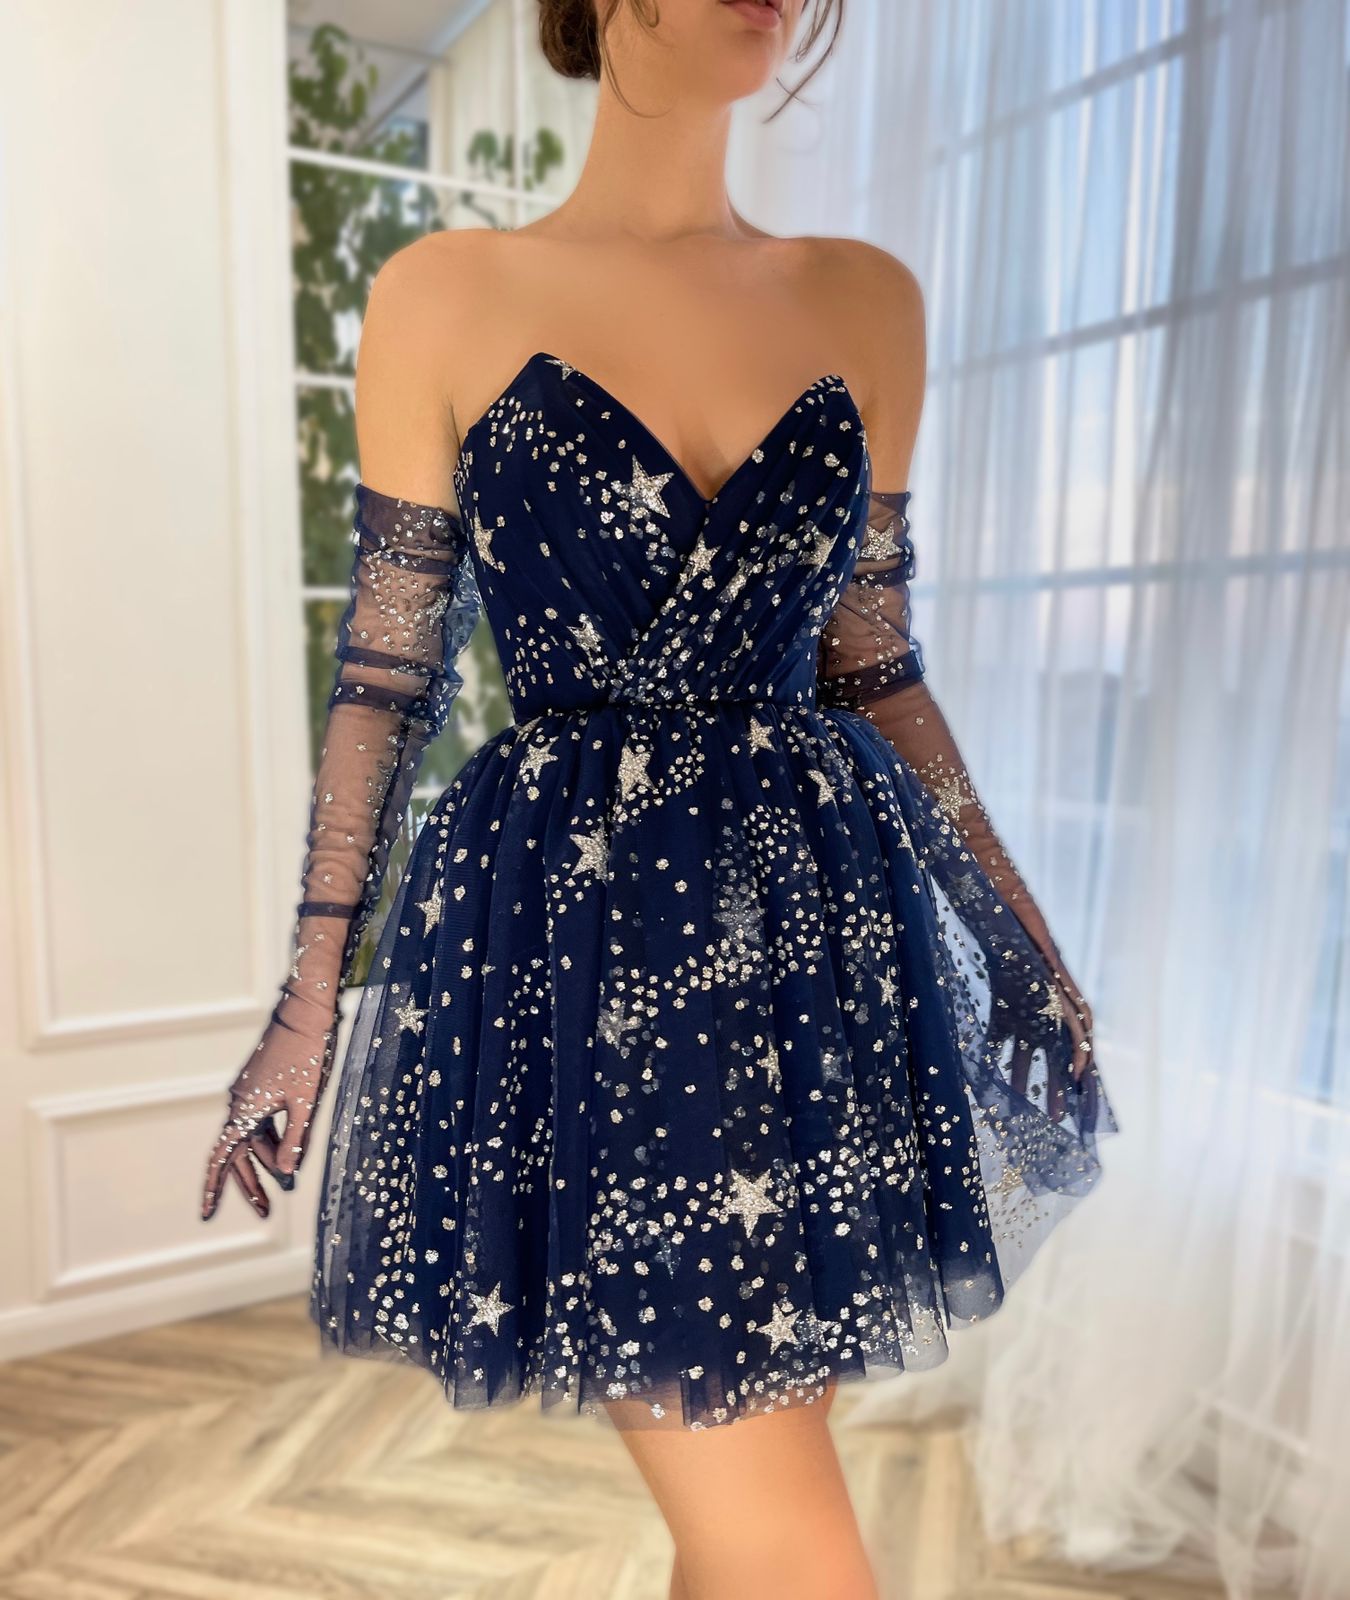 Blue mini dress with no sleeves, gloves and starry fabric